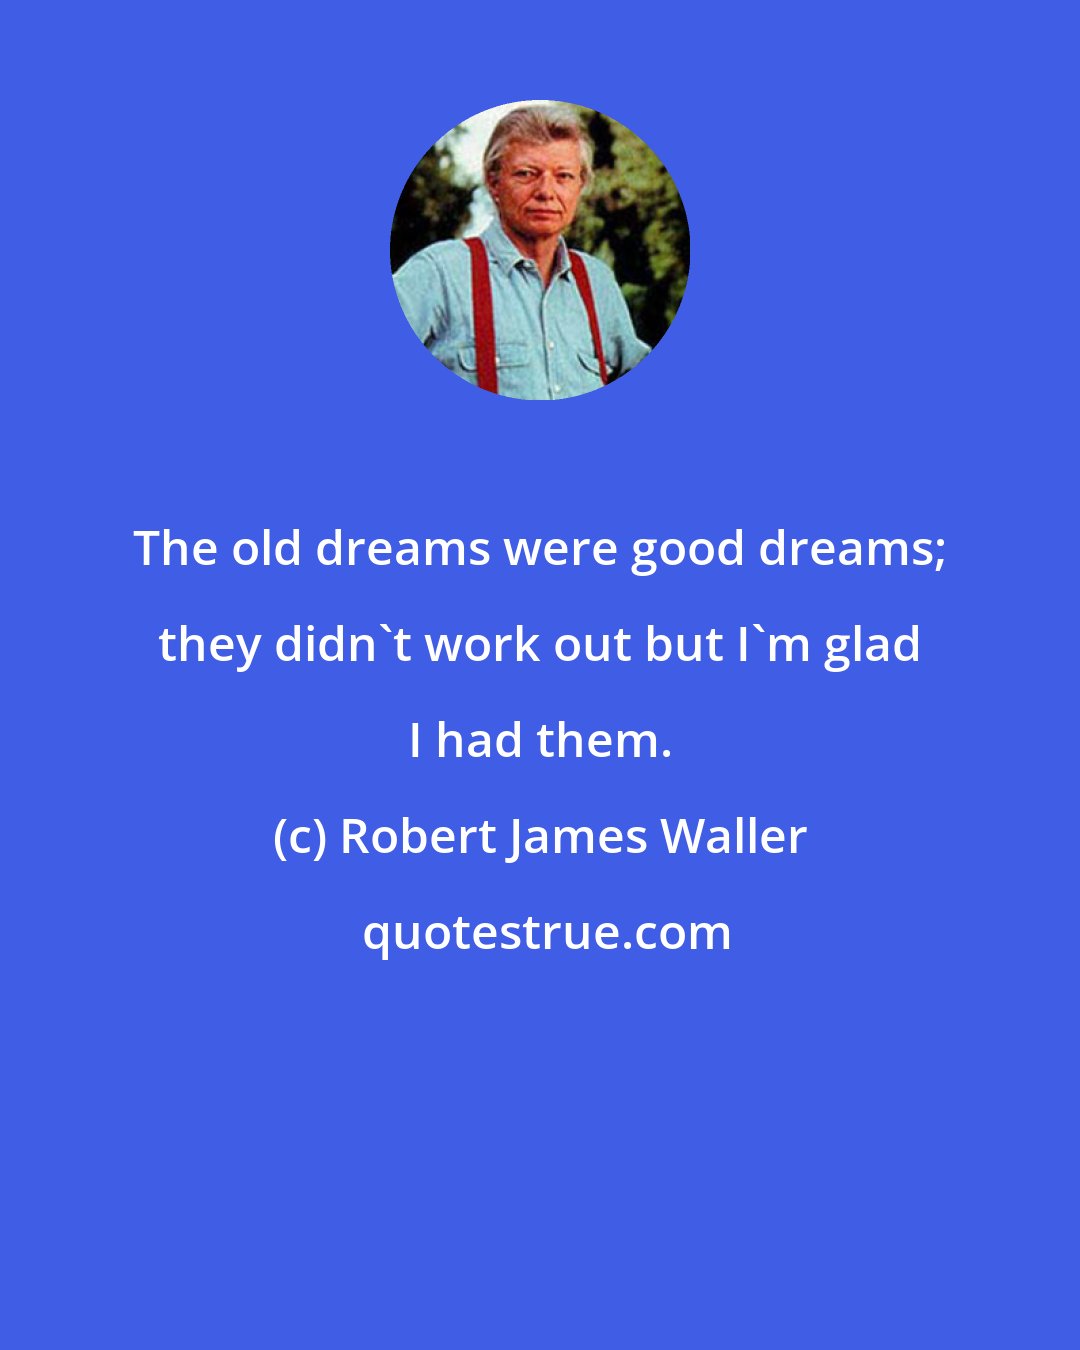 Robert James Waller: The old dreams were good dreams; they didn't work out but I'm glad I had them.